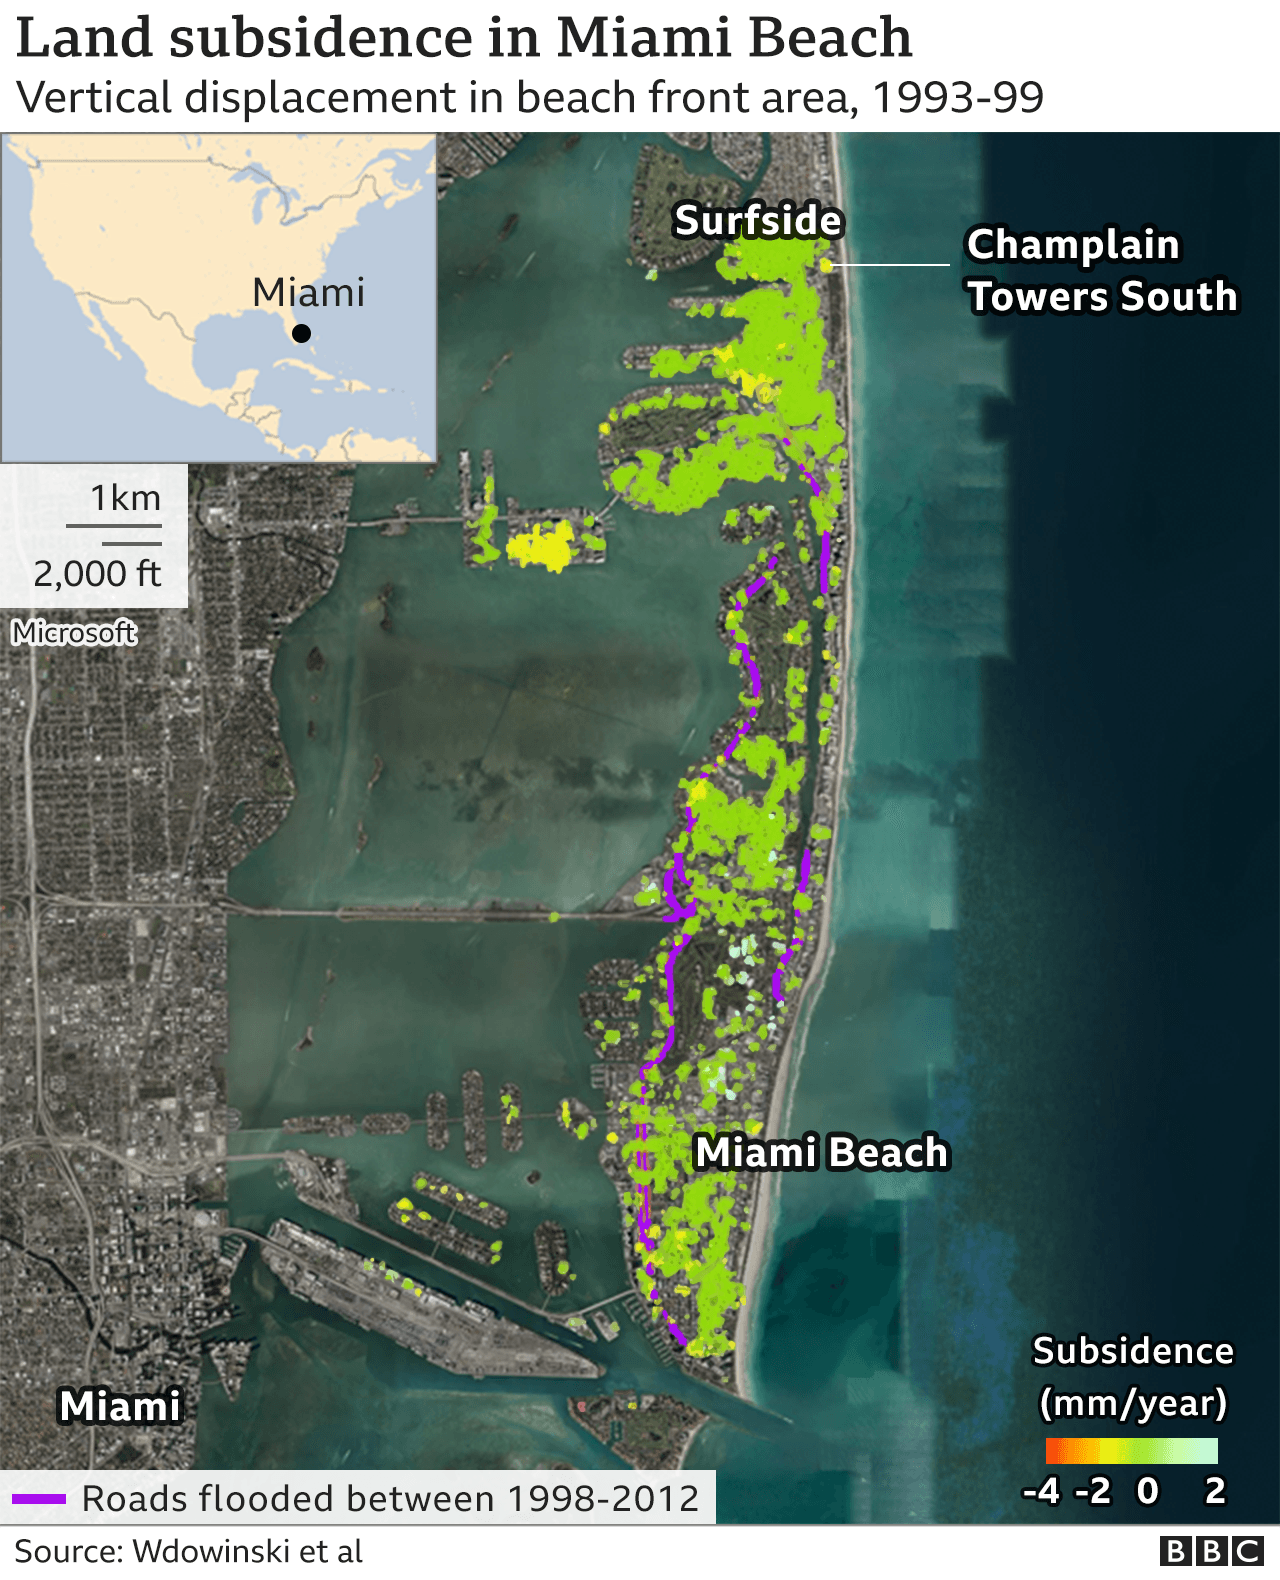 Map showing vertical displacement in the beach front area in the 1990s